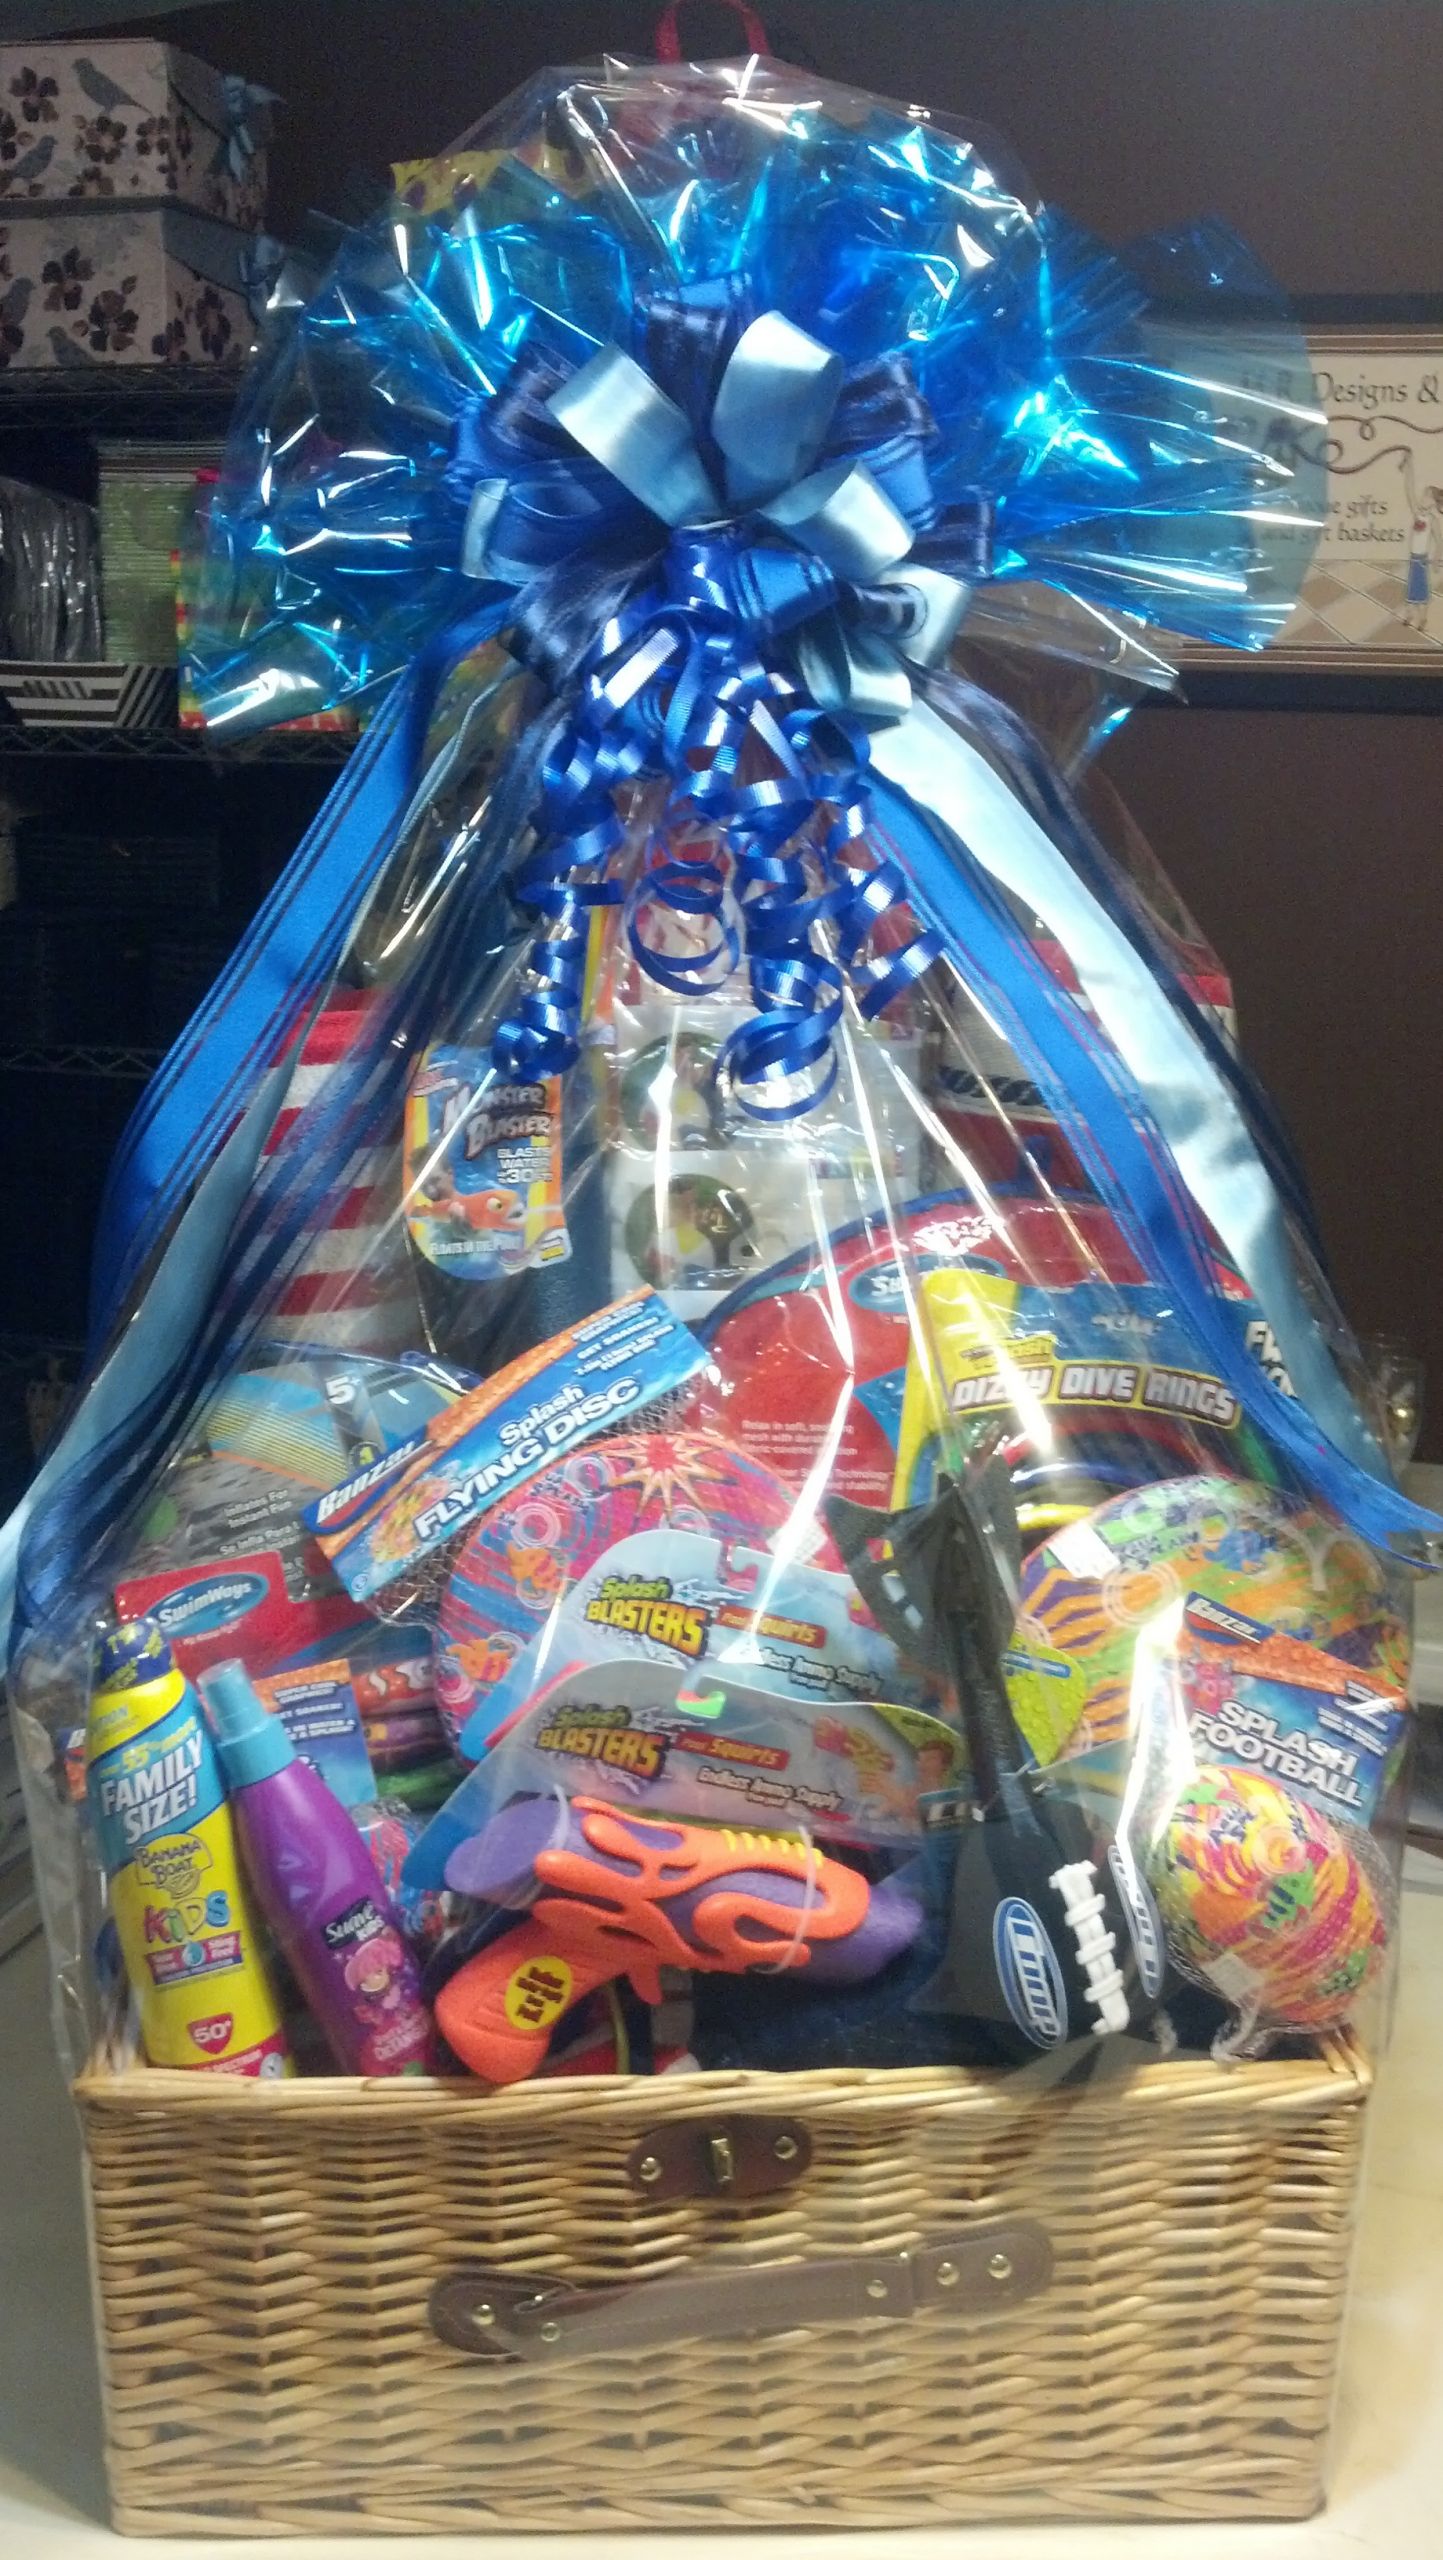 Fundraiser Gift Basket Ideas
 Special Event and Silent Auction Gift Basket Ideas by M R